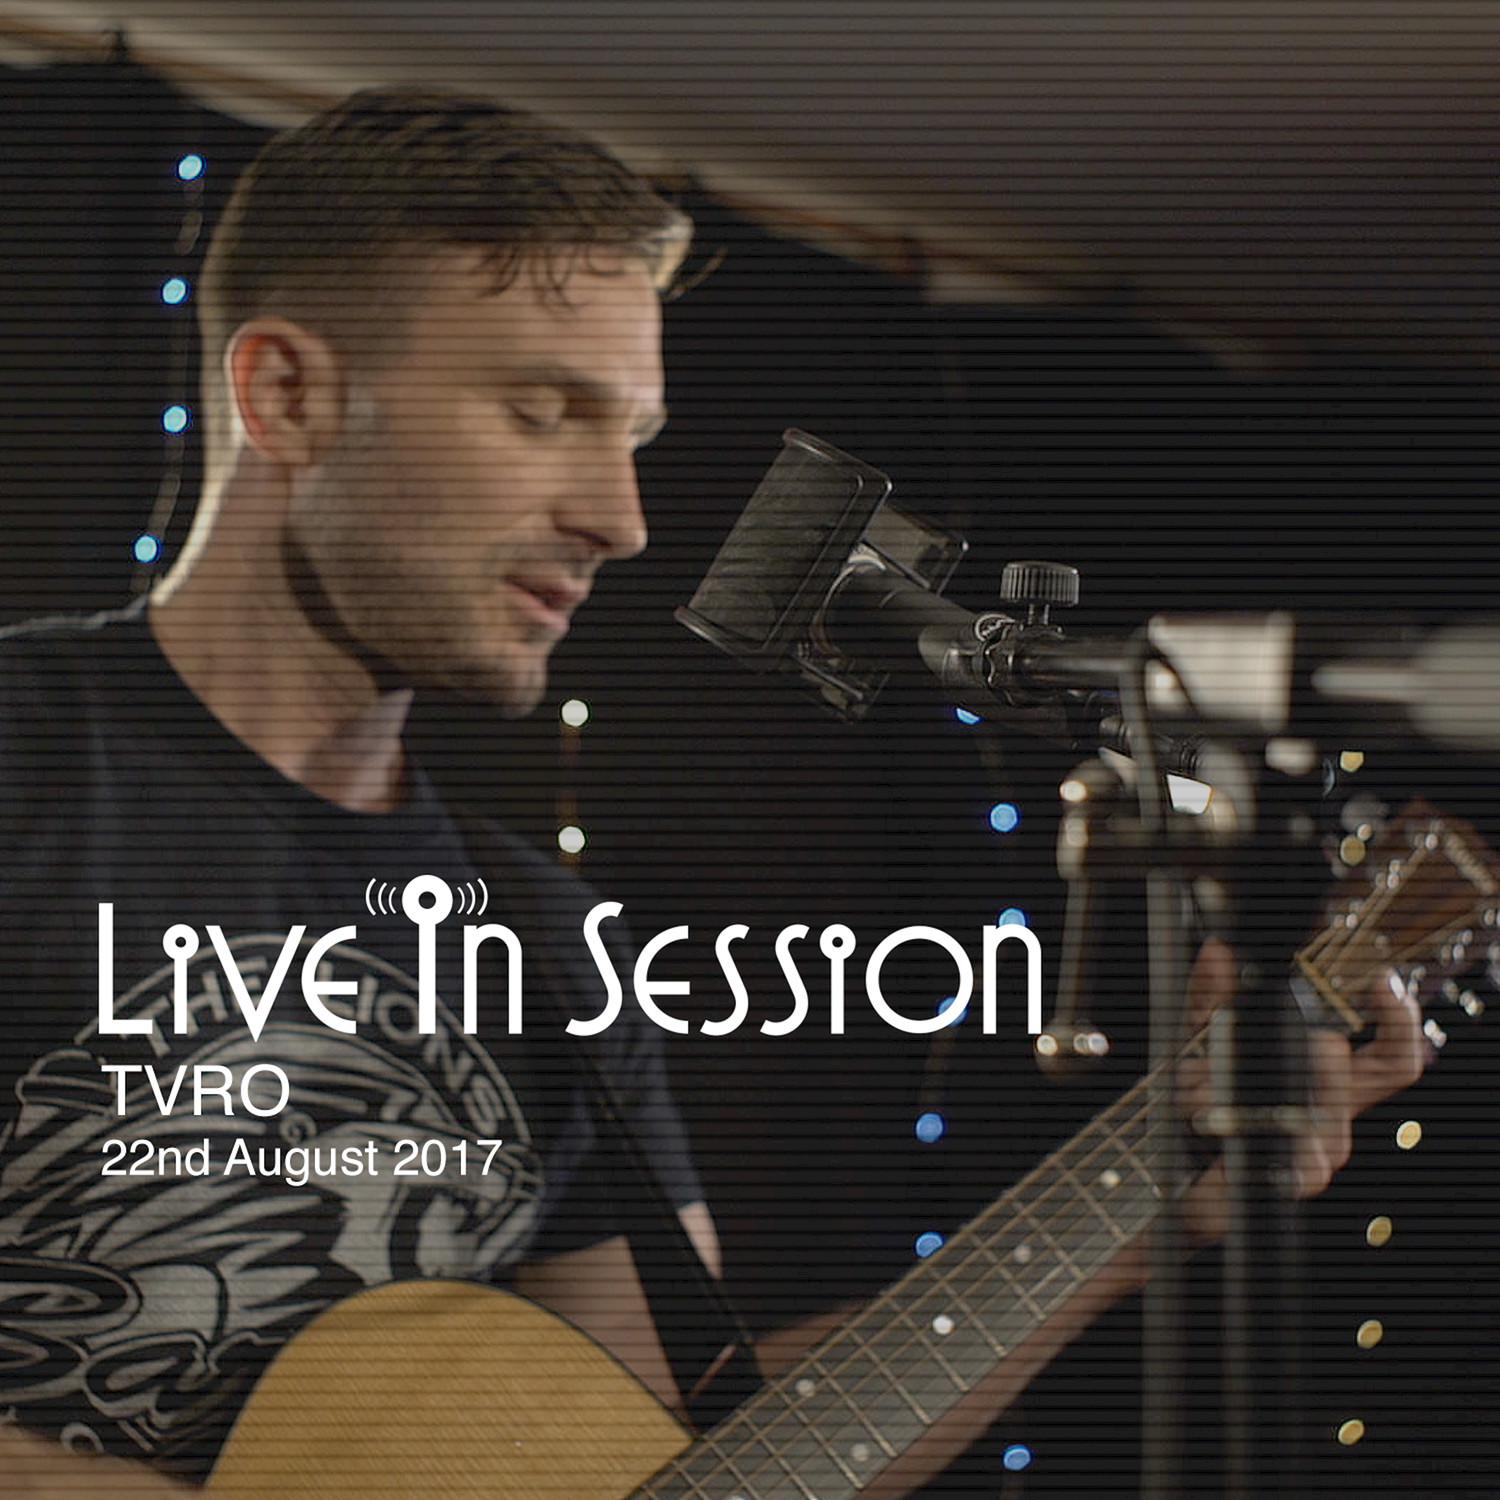 Live in Session with TVRO (22nd August 2017)